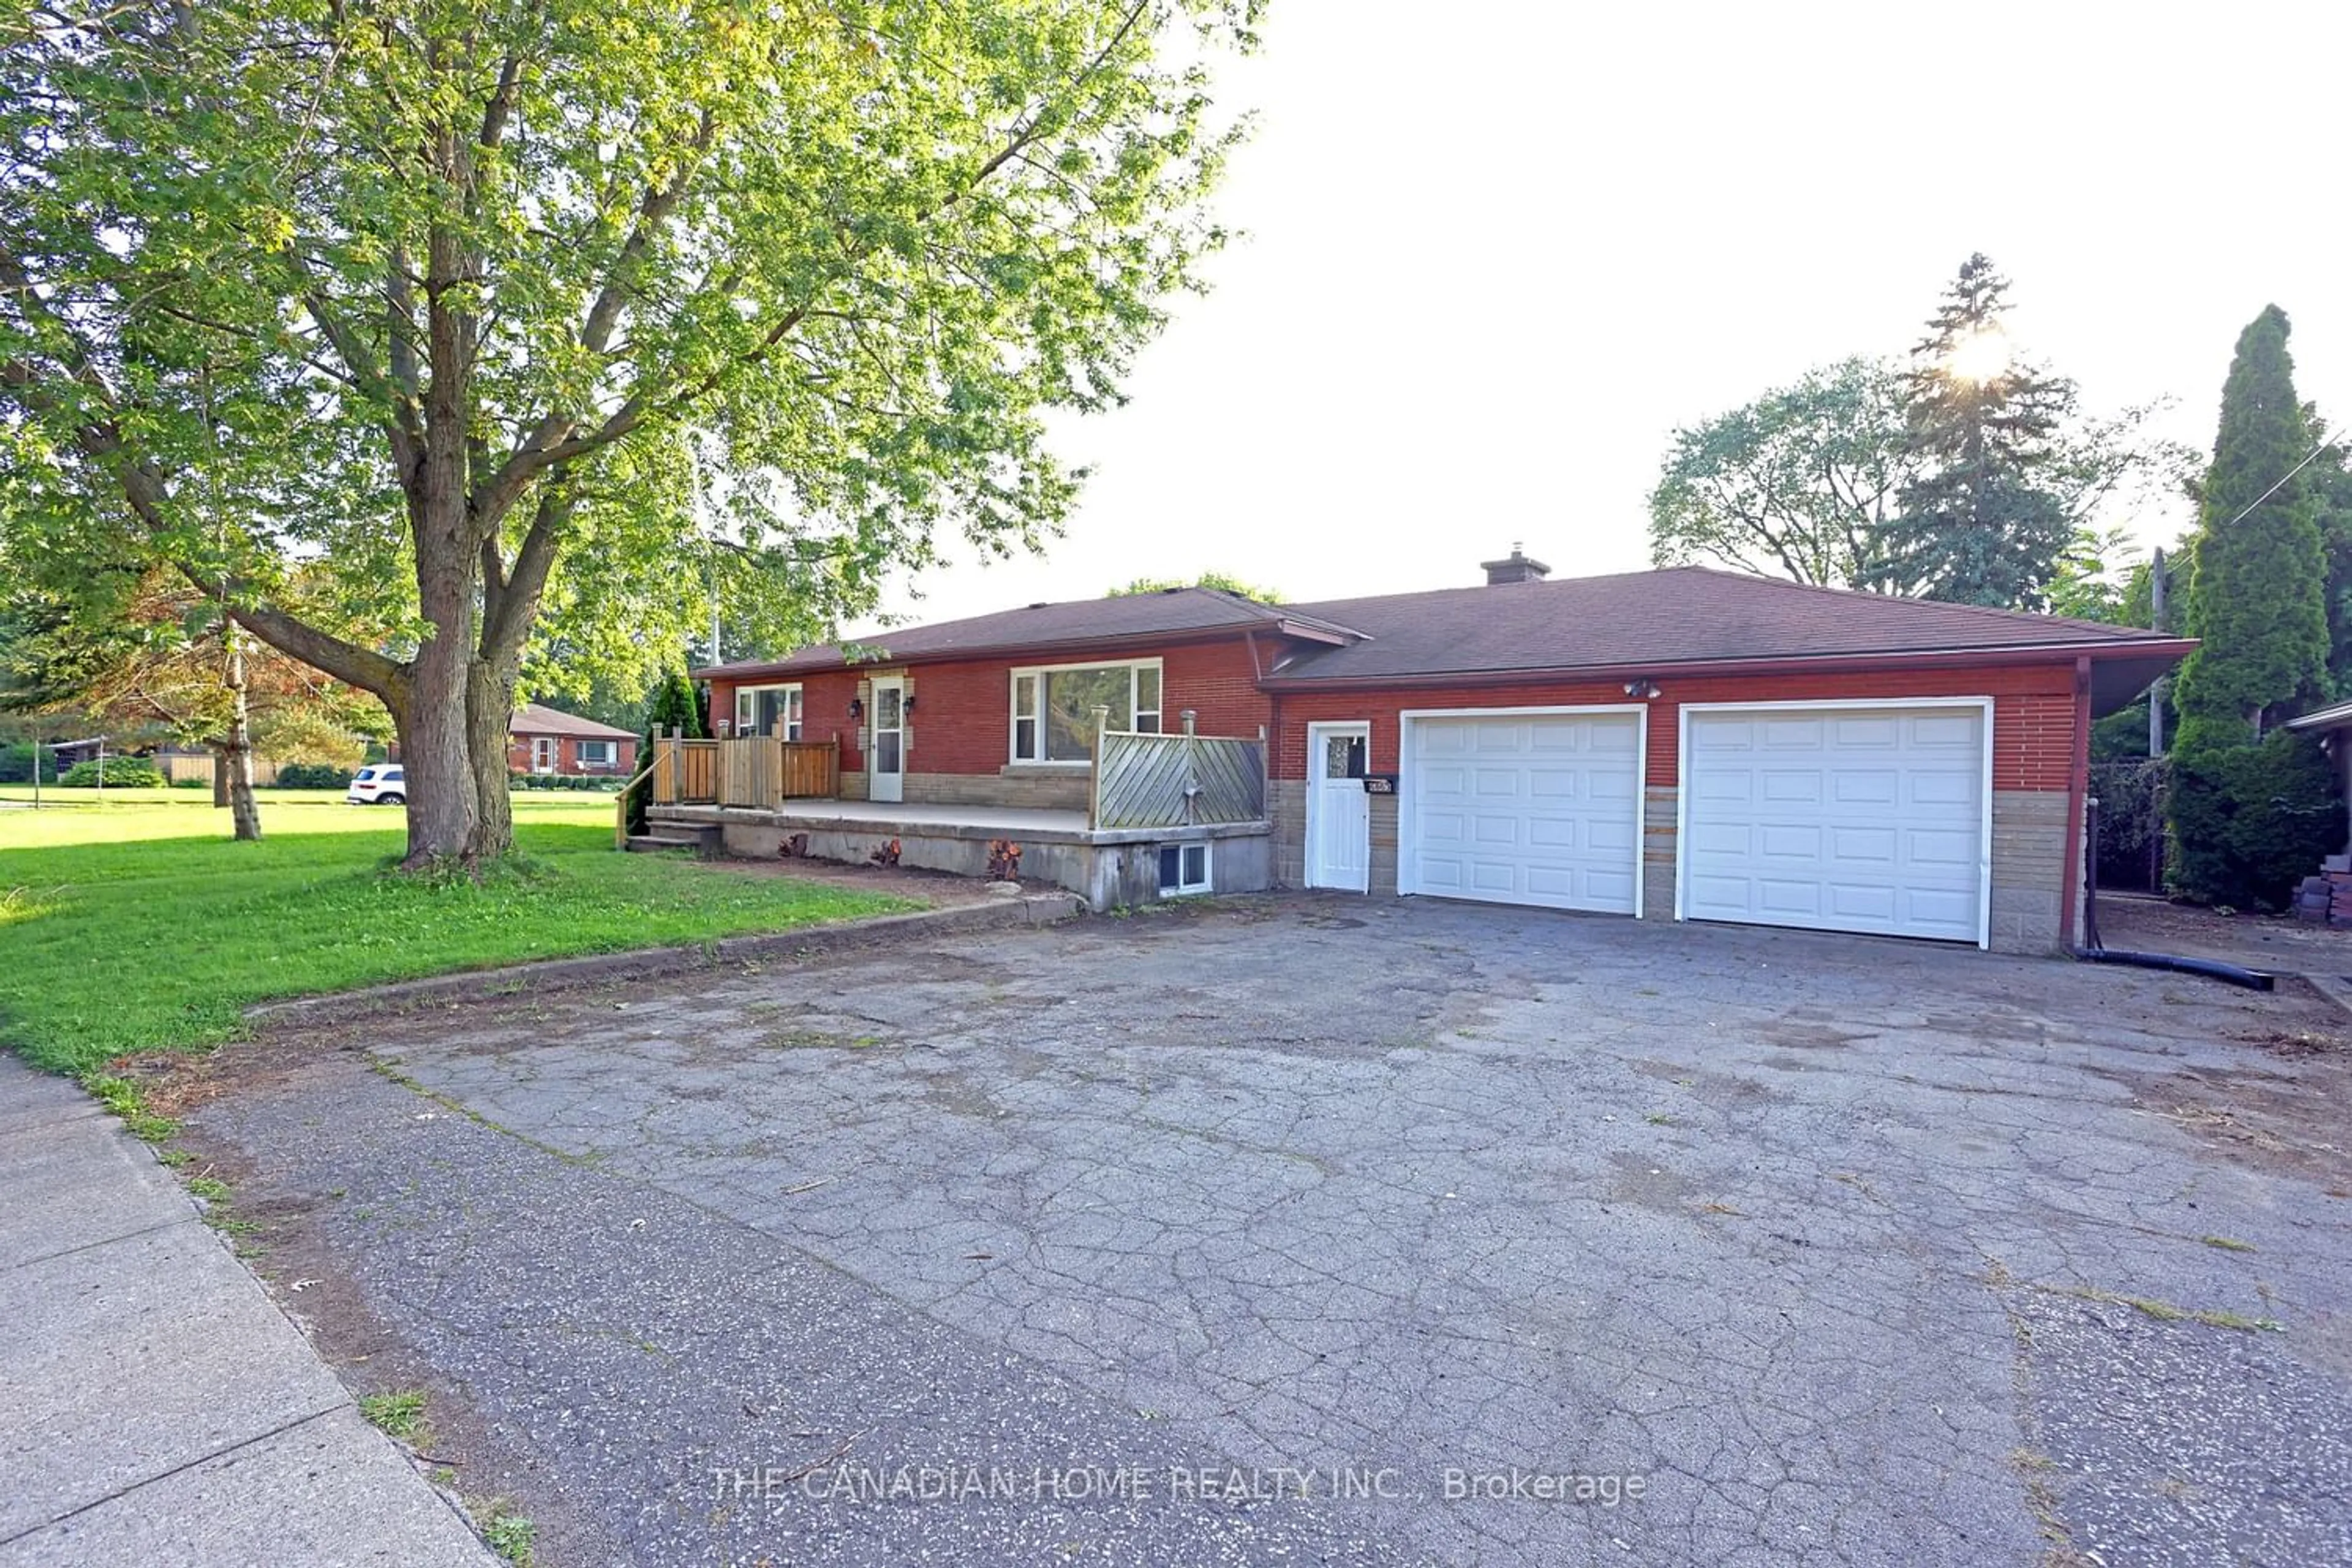 Frontside or backside of a home for 6863 Heximer Ave, Niagara Falls Ontario L2G 7L4